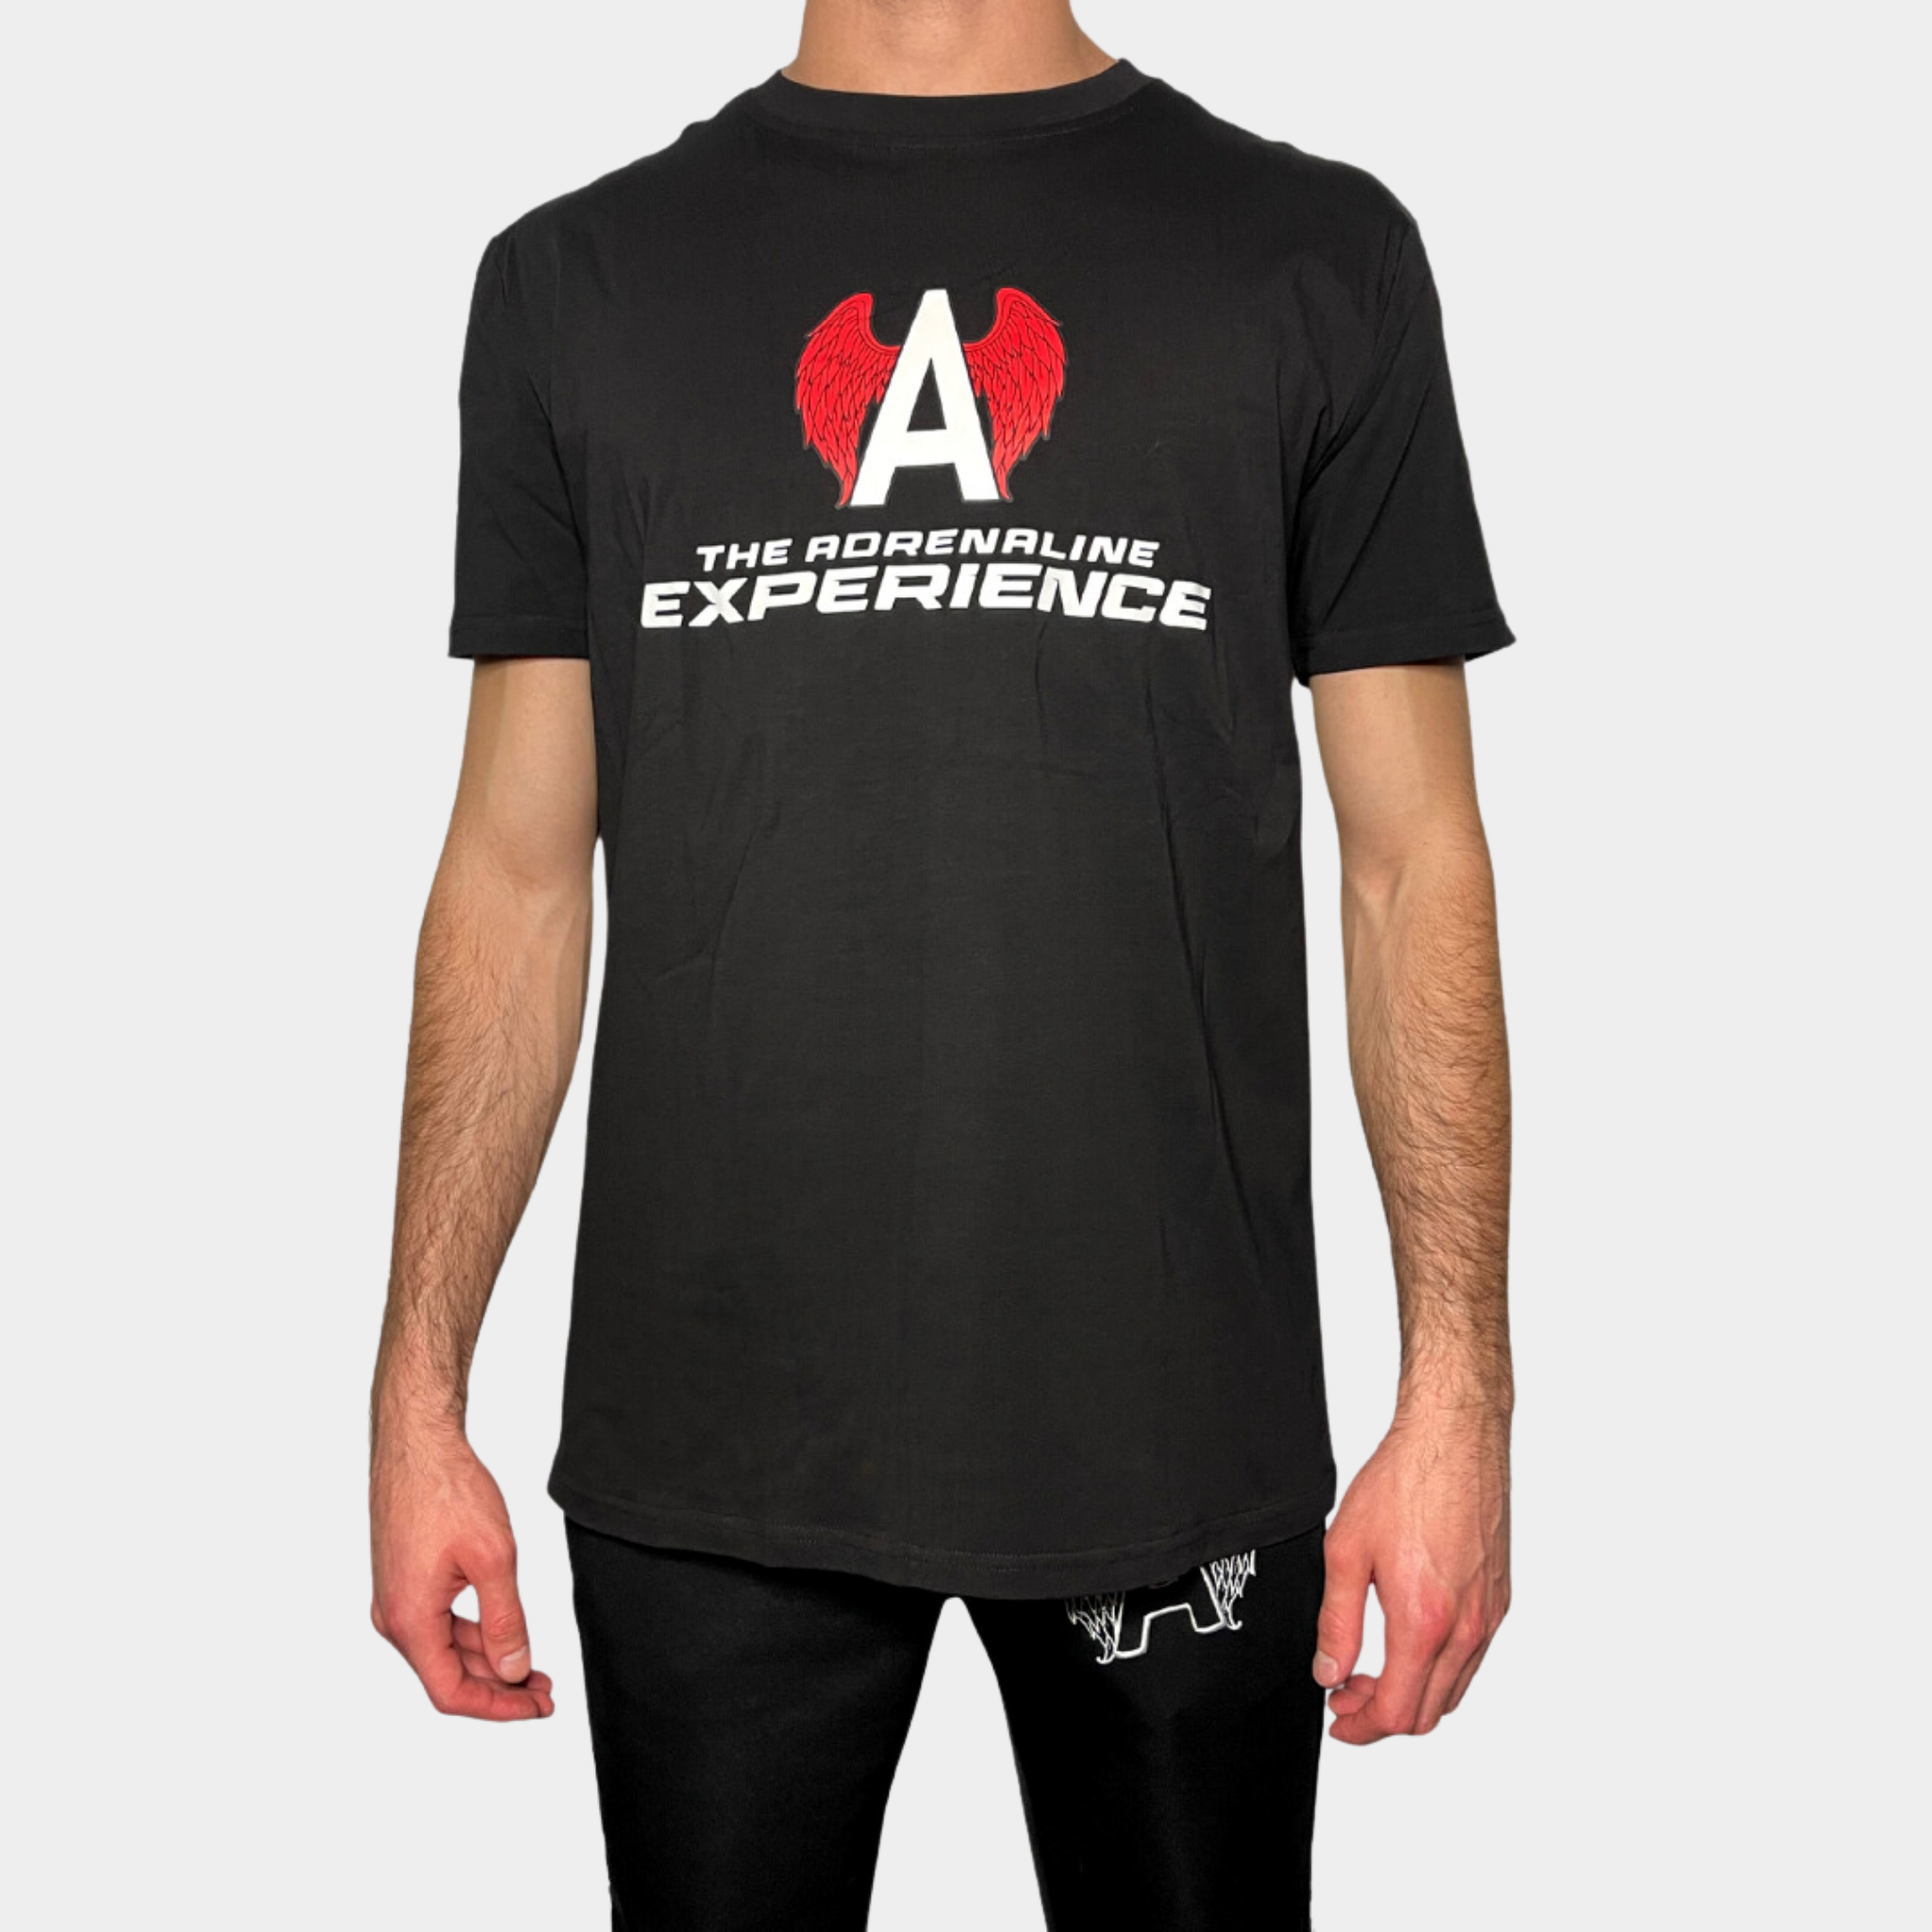 The Adrenaline Experience Tee